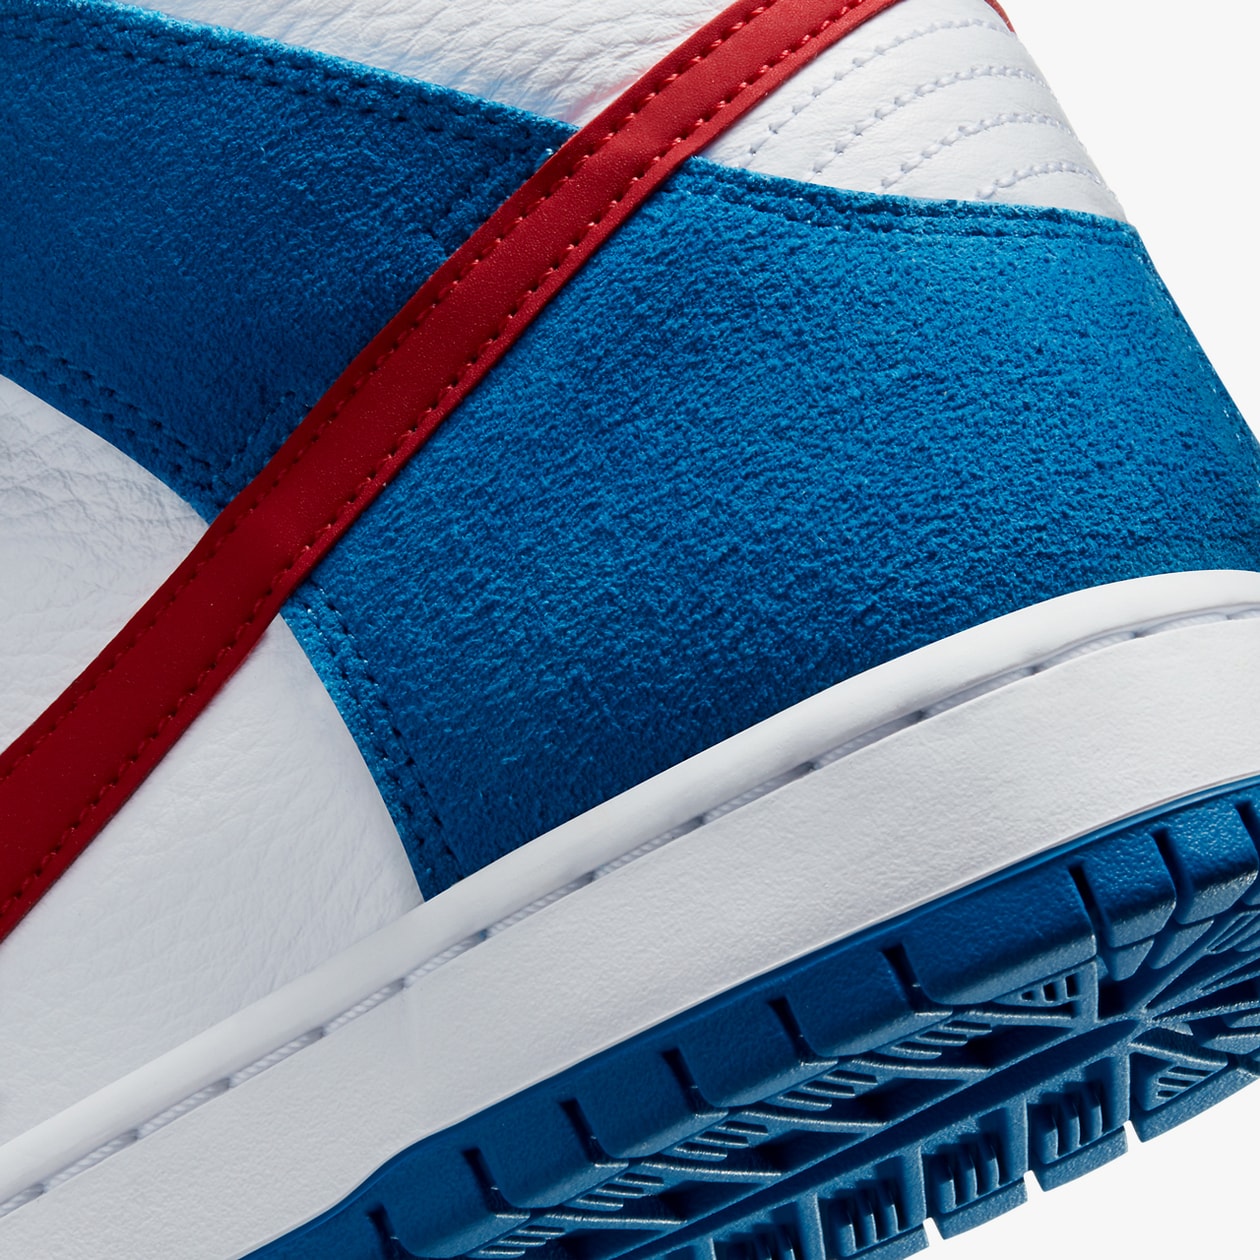 nike sb skateboarding dunk hi high doraemon light photo blue speed yellow university red white CI2692 400 official release date info photos price store list buying guide